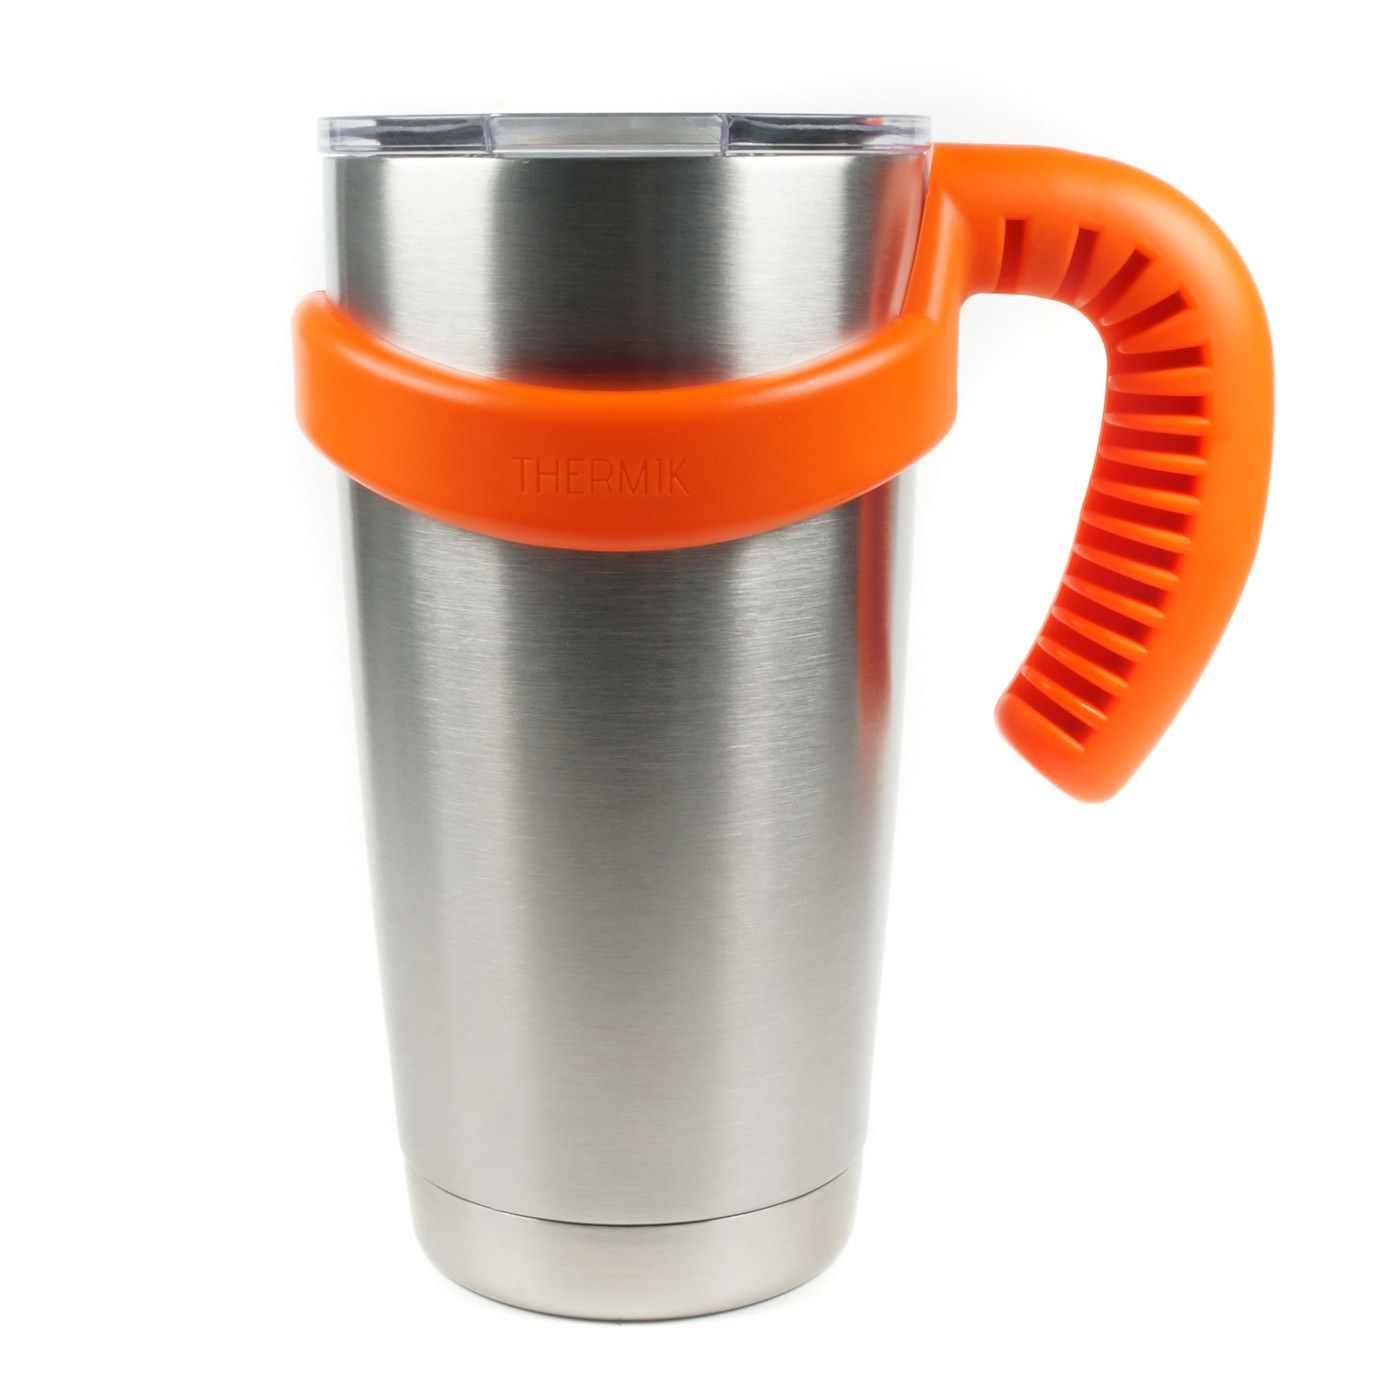 20 oz Tumbler Handle - Fits Yeti, Ozark Trail and many more - Thermik